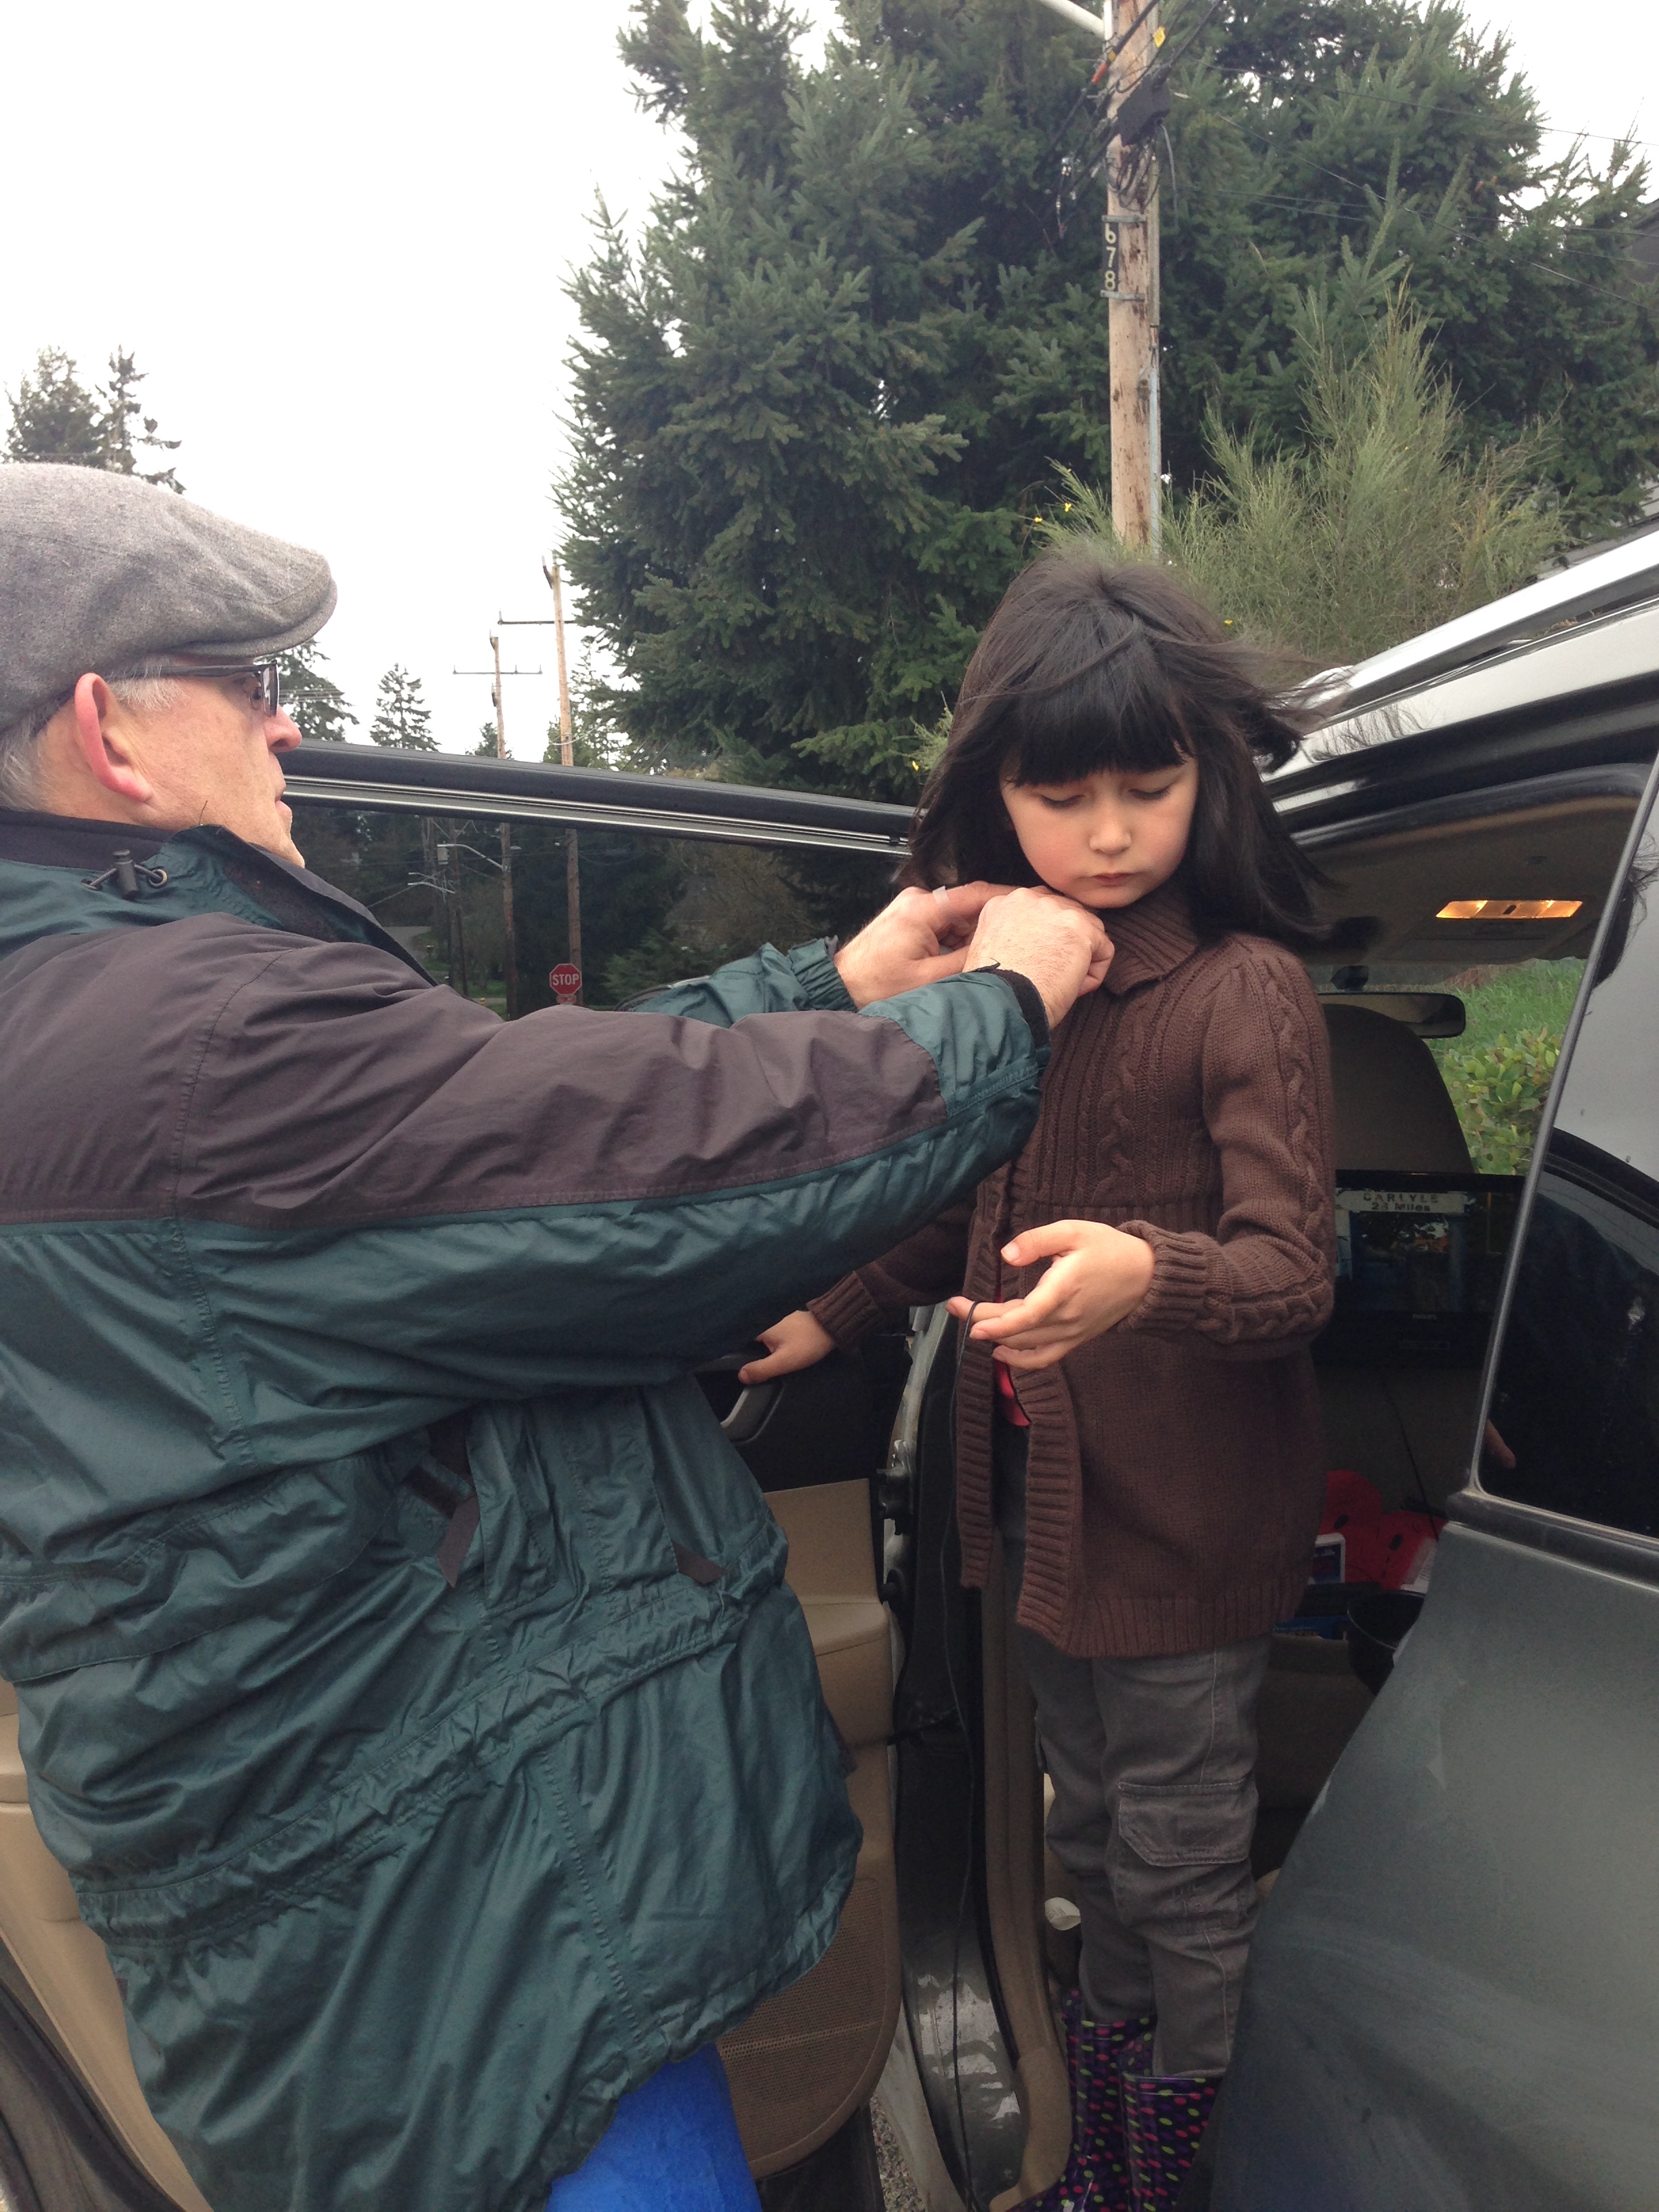 Working on a short film that will be shown at the Seattle International Film Festival, 2014. Having her mic placed.